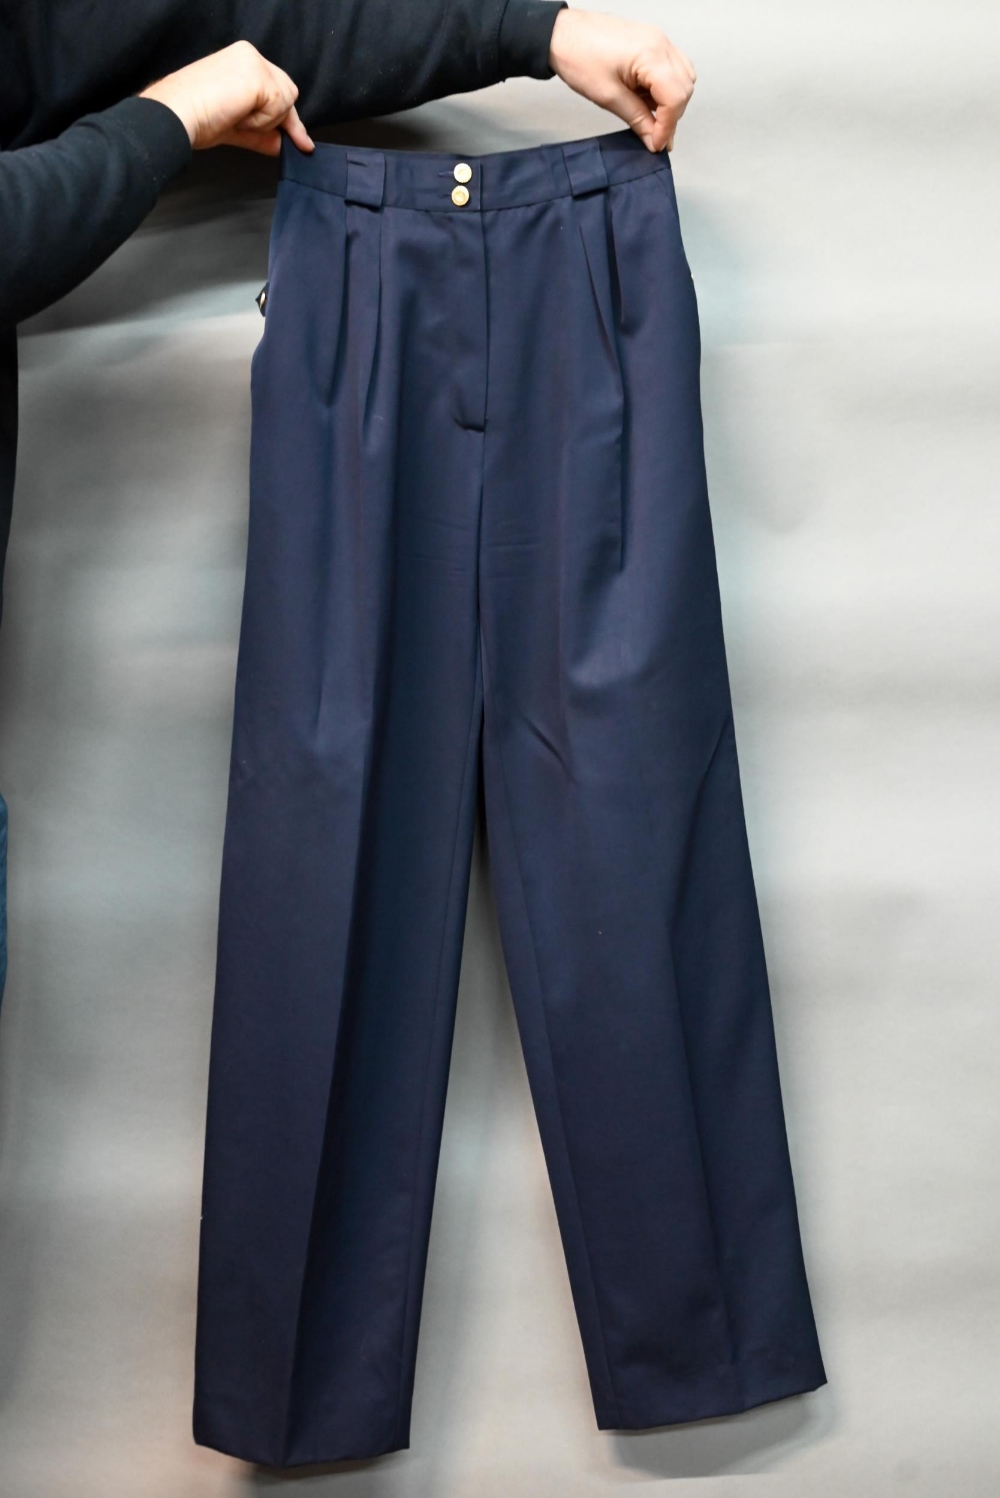 Chanel - A pair of navy trousers, with pleated front and gilt metal button detailing, fully lined,